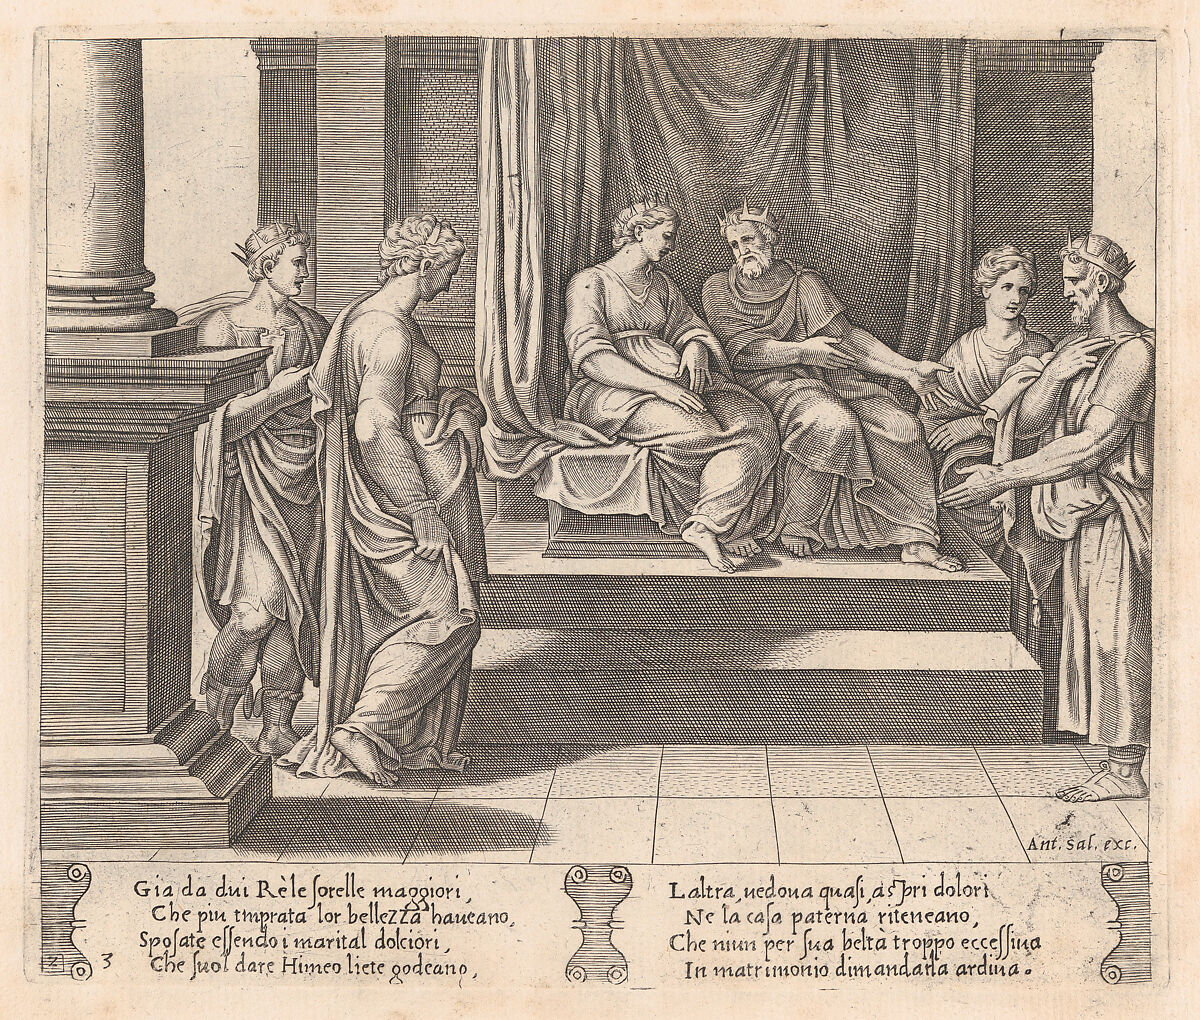 Plate 3: Psyche's two sisters are married to kings, with Psyche standing at left, accompanied by another king, from "The Story of Cupid and Psyche as told by Apuleius", Master of the Die (Italian, active Rome, ca. 1530–60), Engraving 